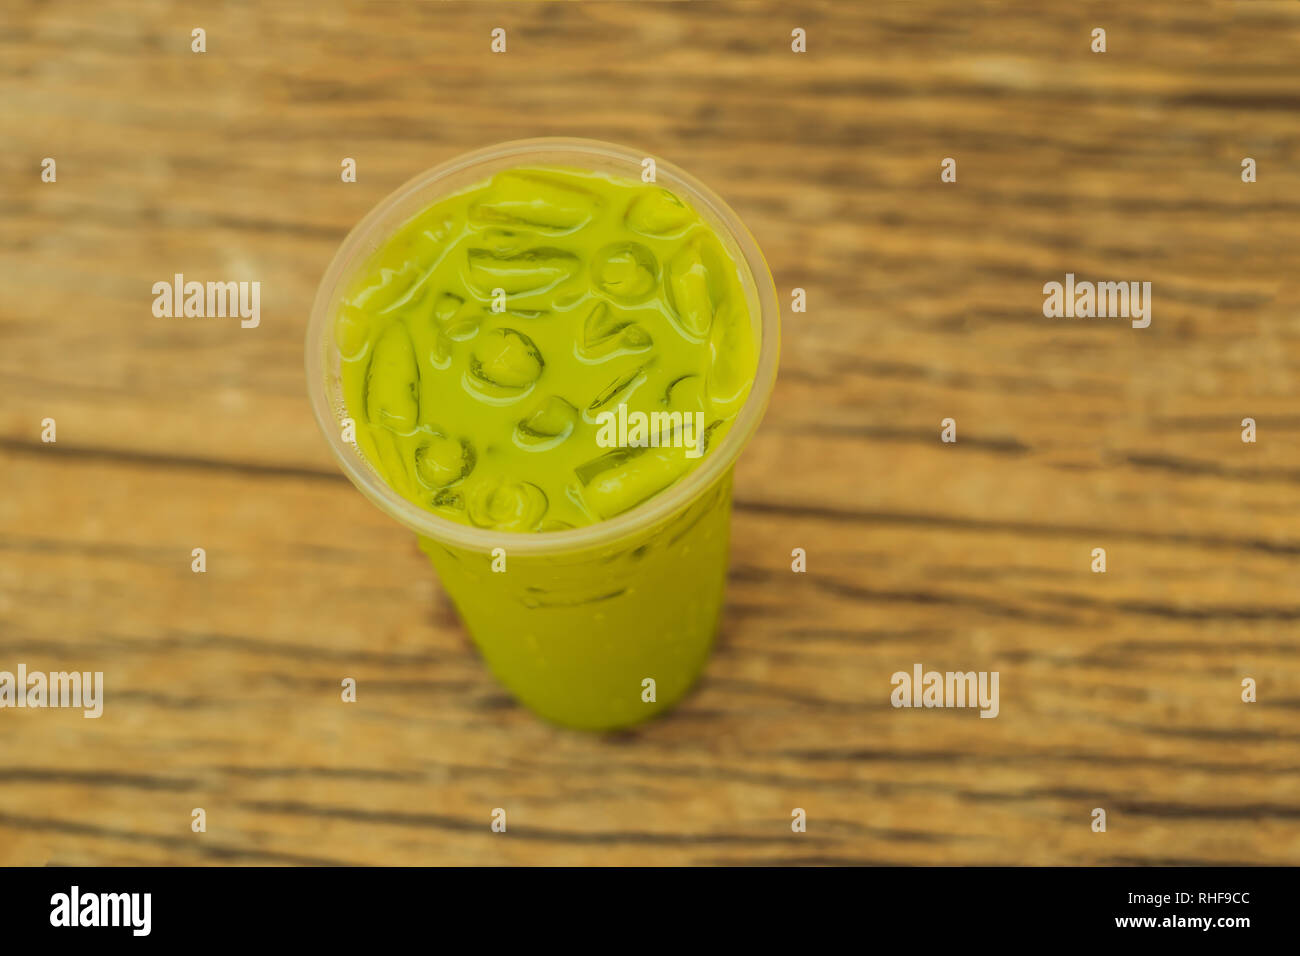 https://c8.alamy.com/comp/RHF9CC/green-tea-latte-with-ice-in-plastic-cup-and-straw-on-wooden-background-homemade-iced-matcha-latte-tea-with-milk-take-away-RHF9CC.jpg